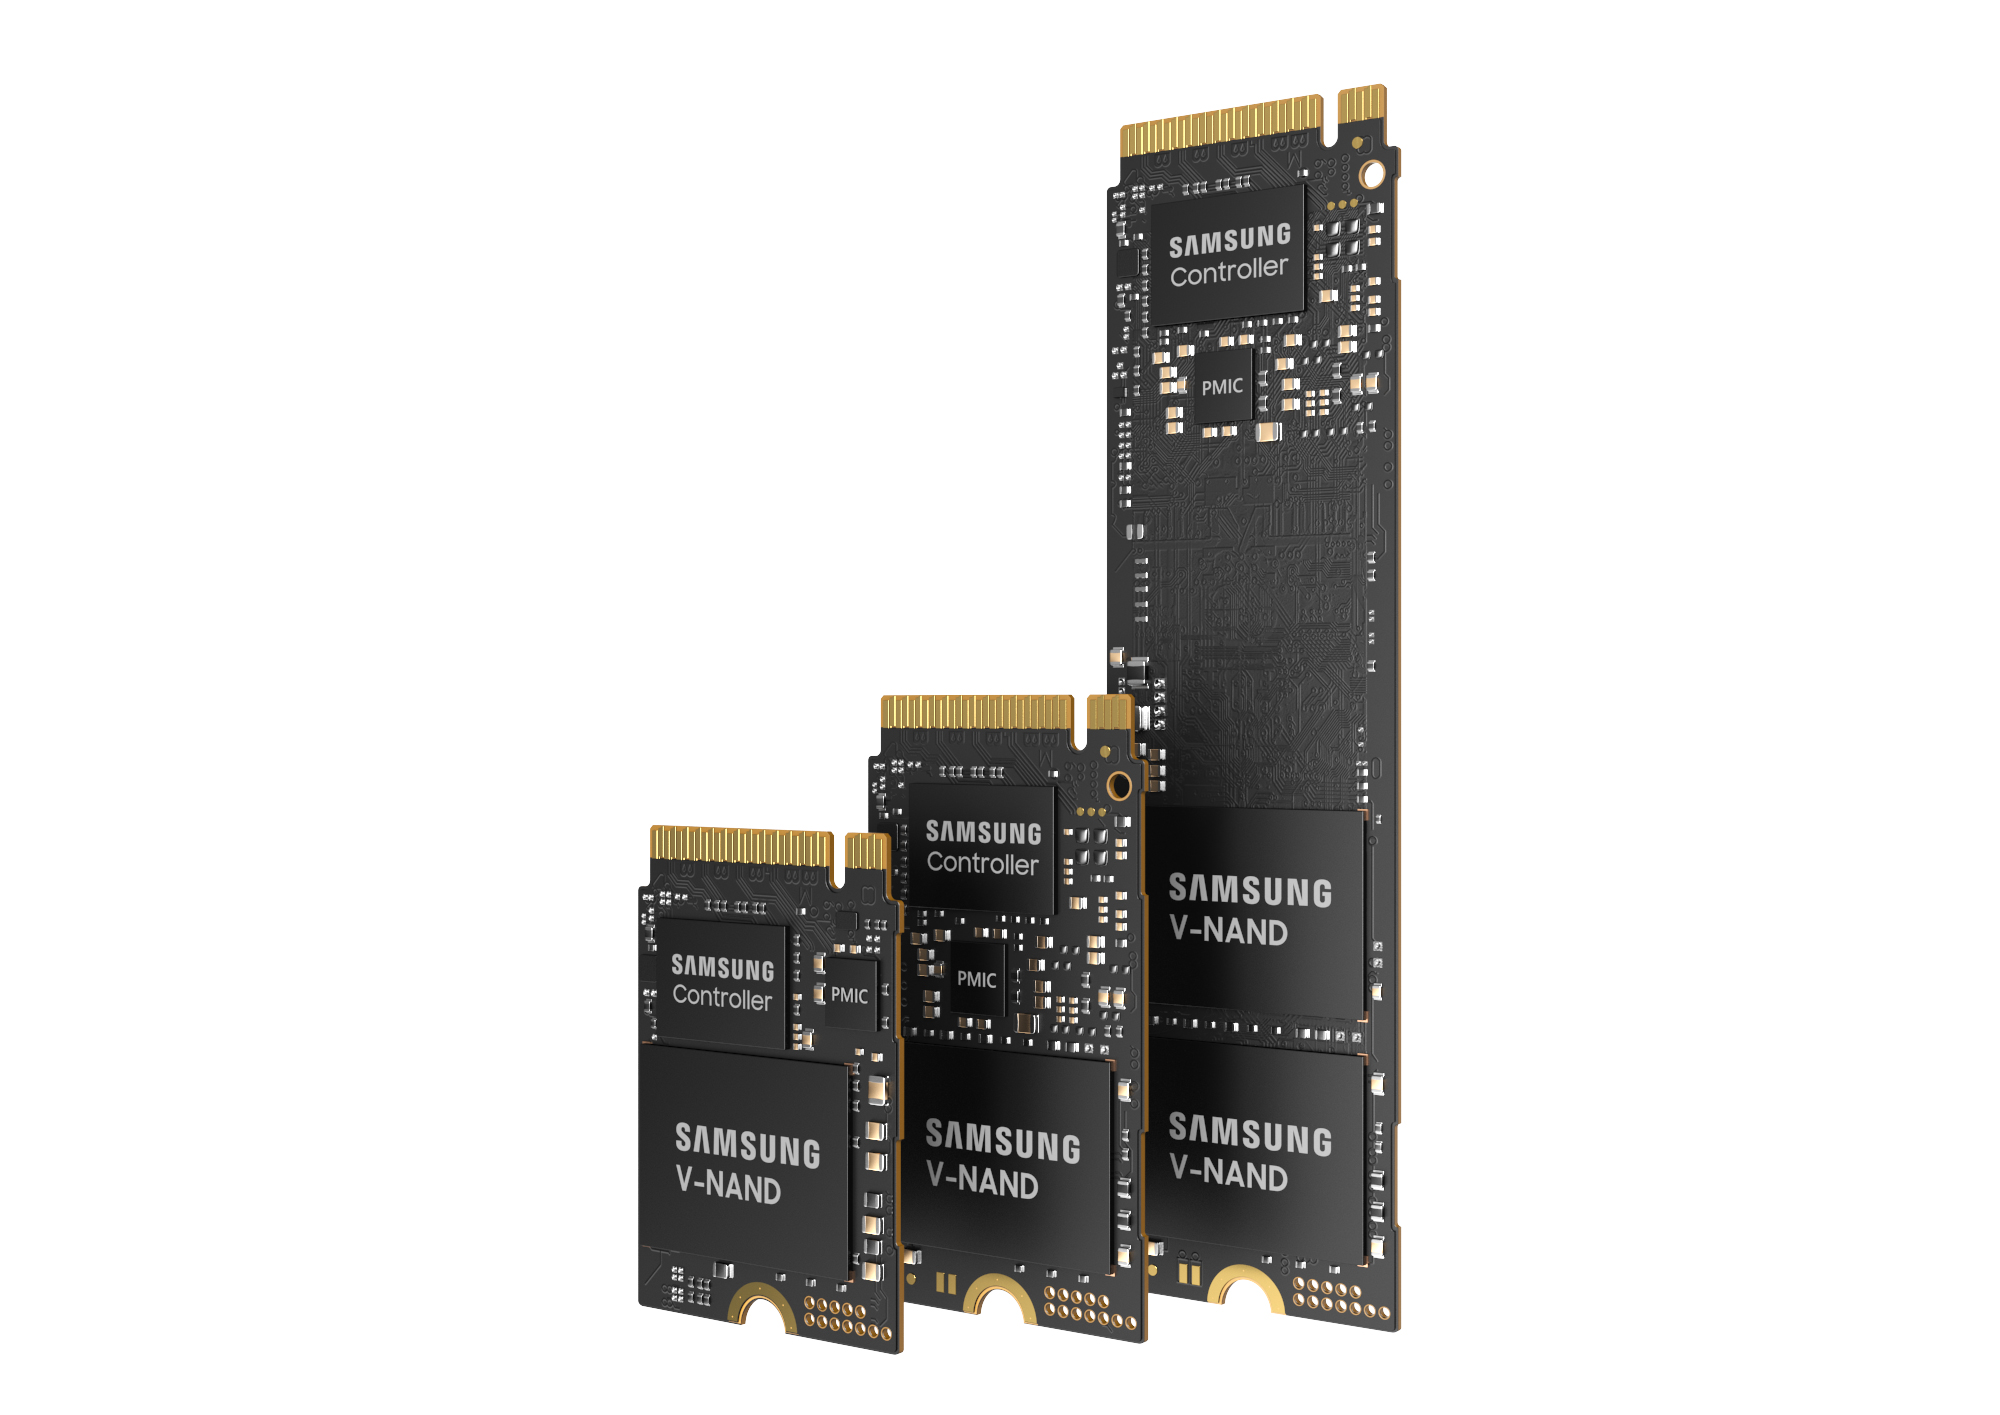 Samsung intros new SSD with higher efficiency, performance